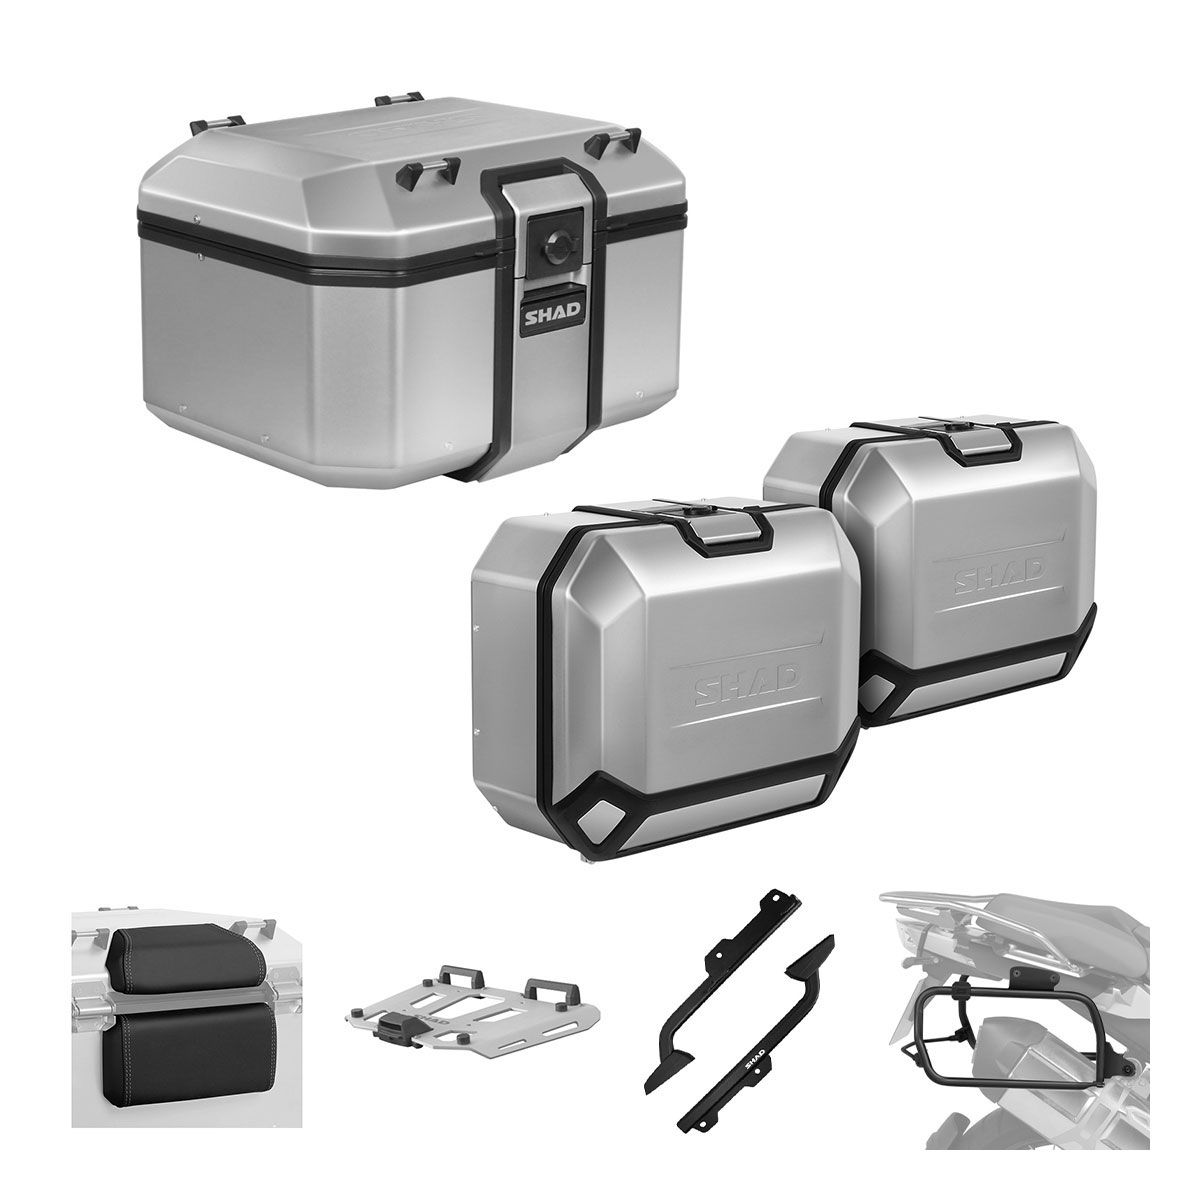 SHAD Top case and side cases kit 